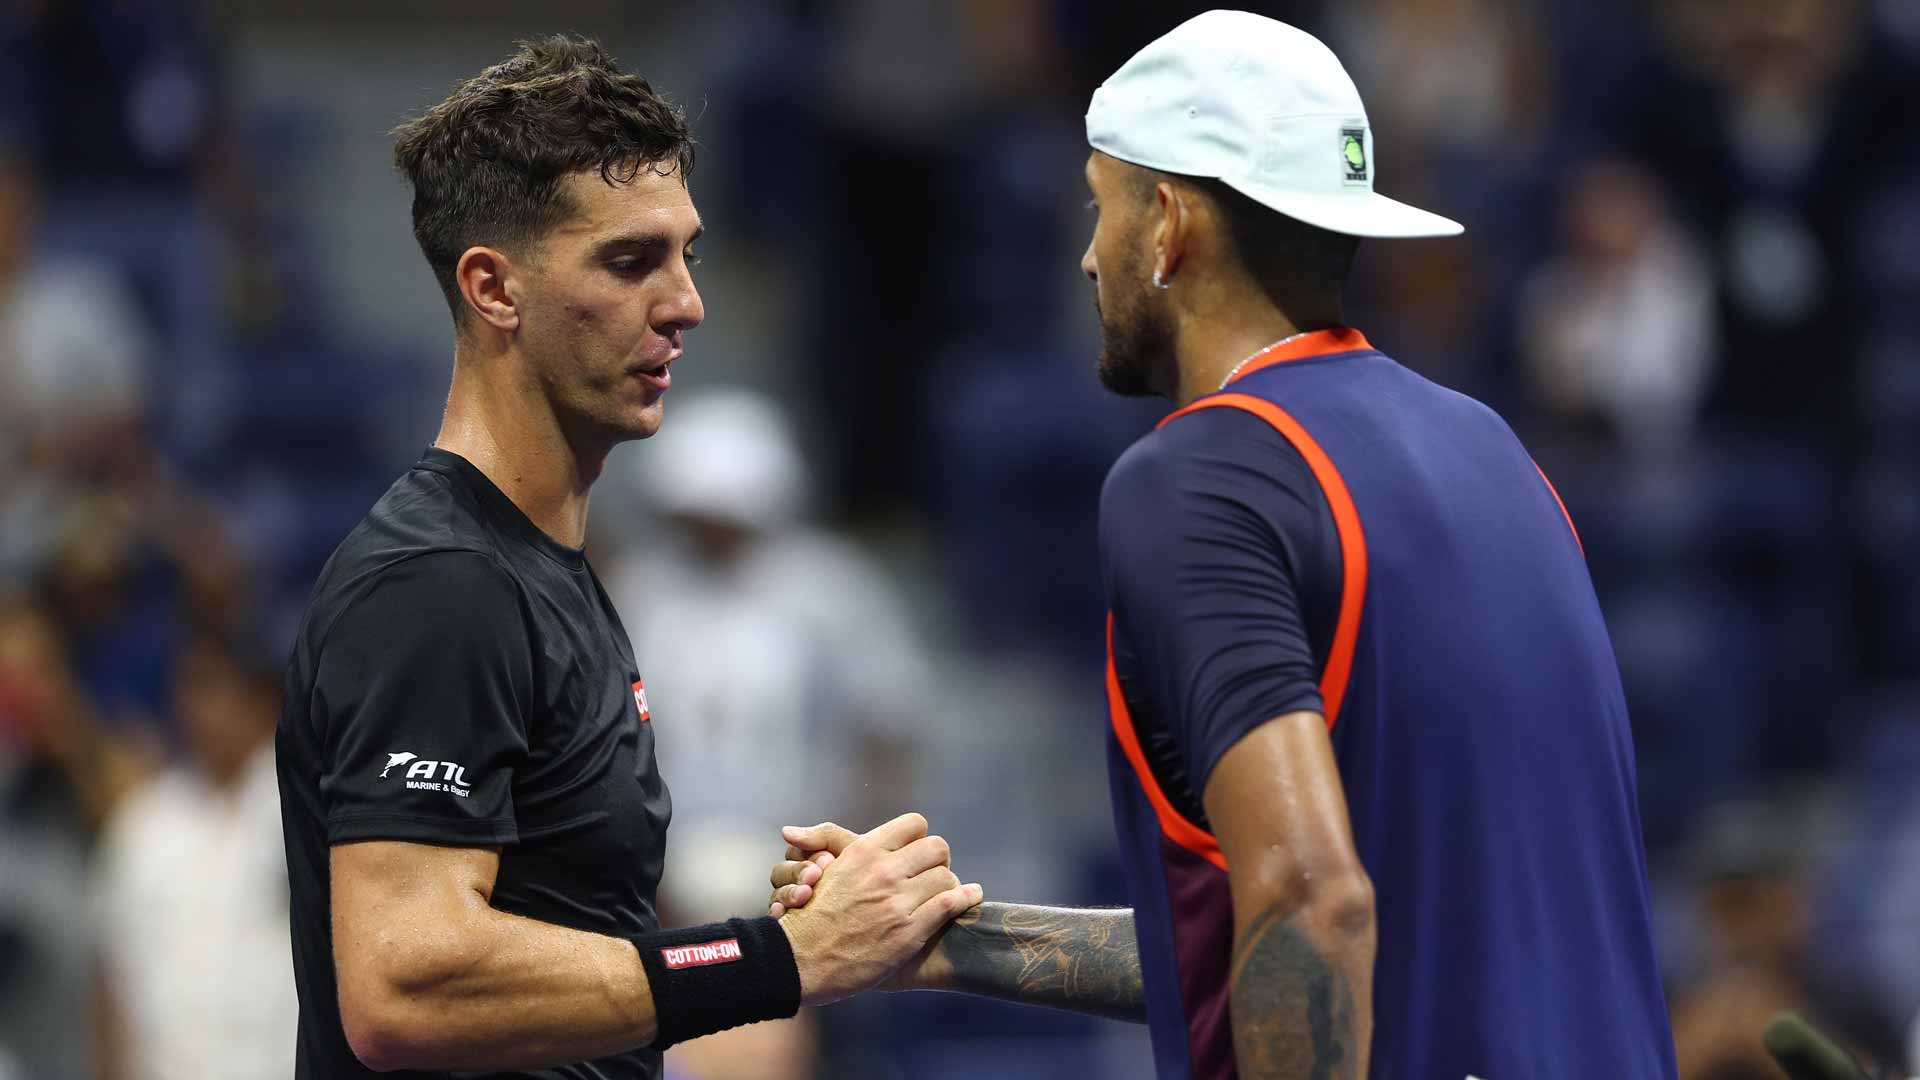 Close friends Kokkinakis and Kyrgios encountered each other in the <a href='https://www.atptour.com/en/tournaments/us-open/560/overview'>US Open</a> opening round.